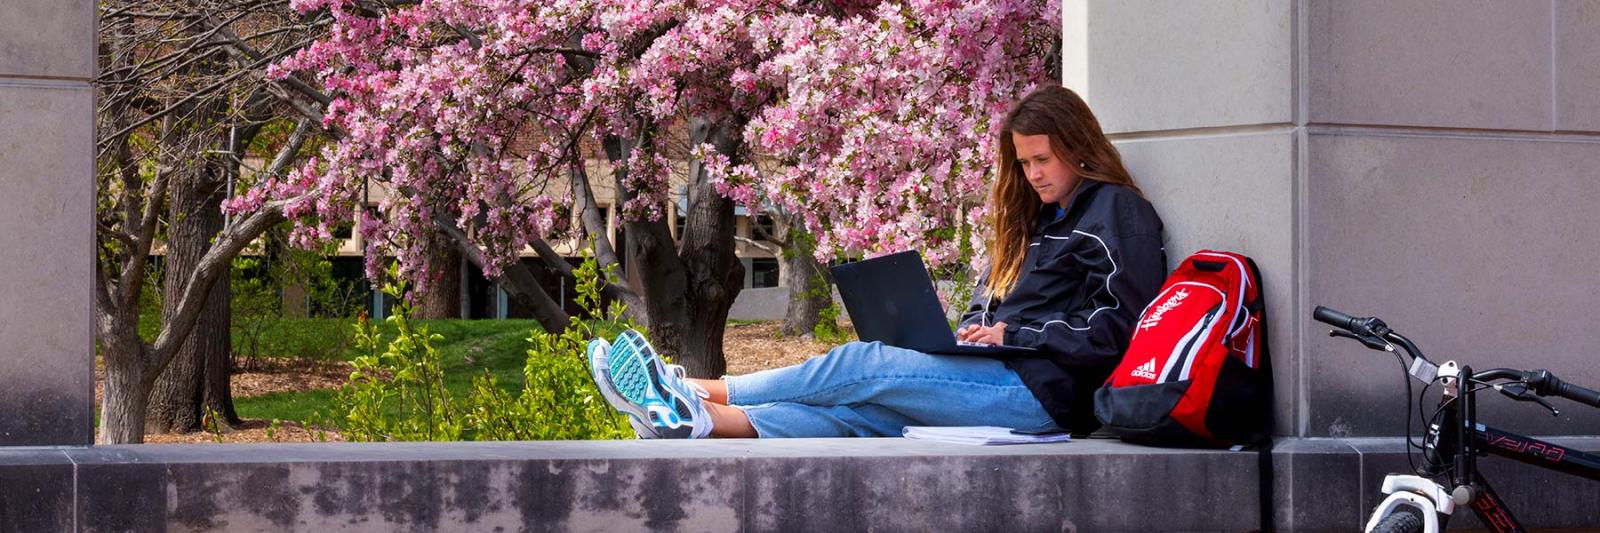 student studying outside with laptop